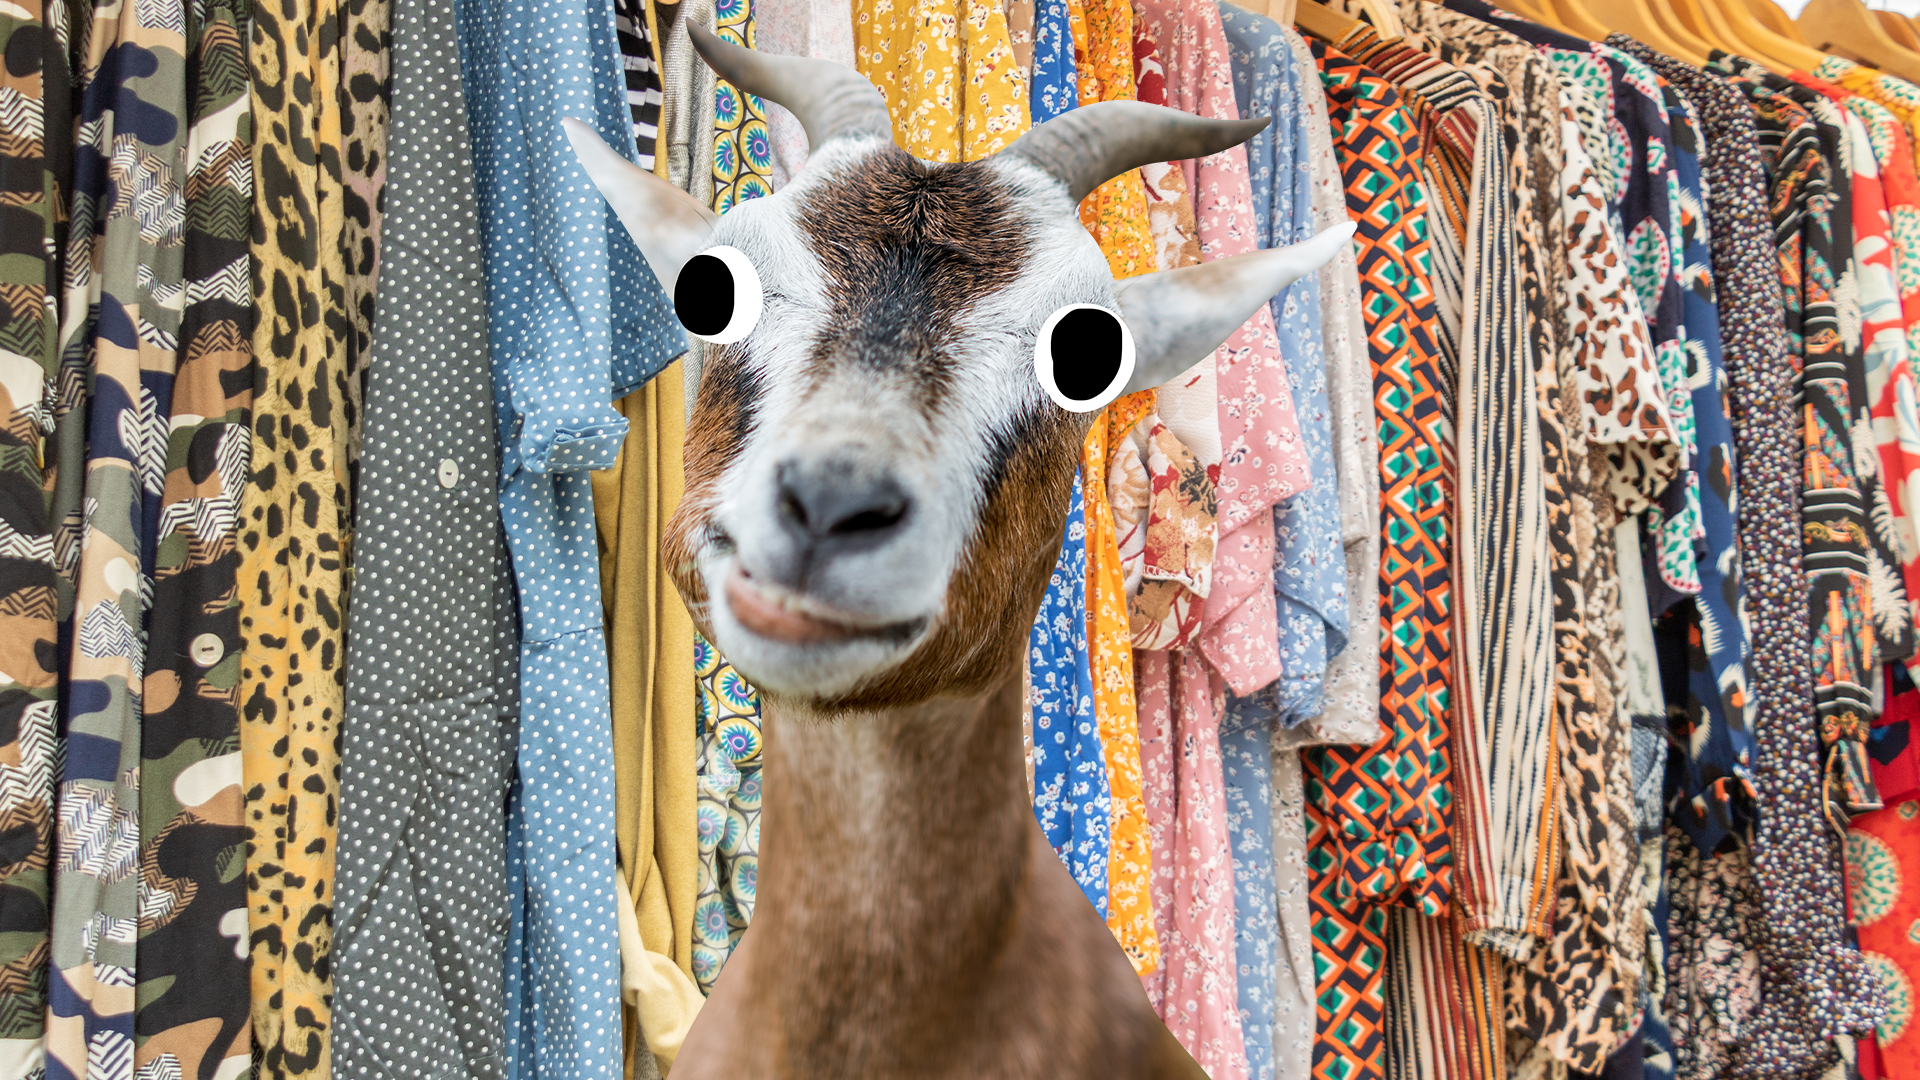 Beano goat on clothes rail background 